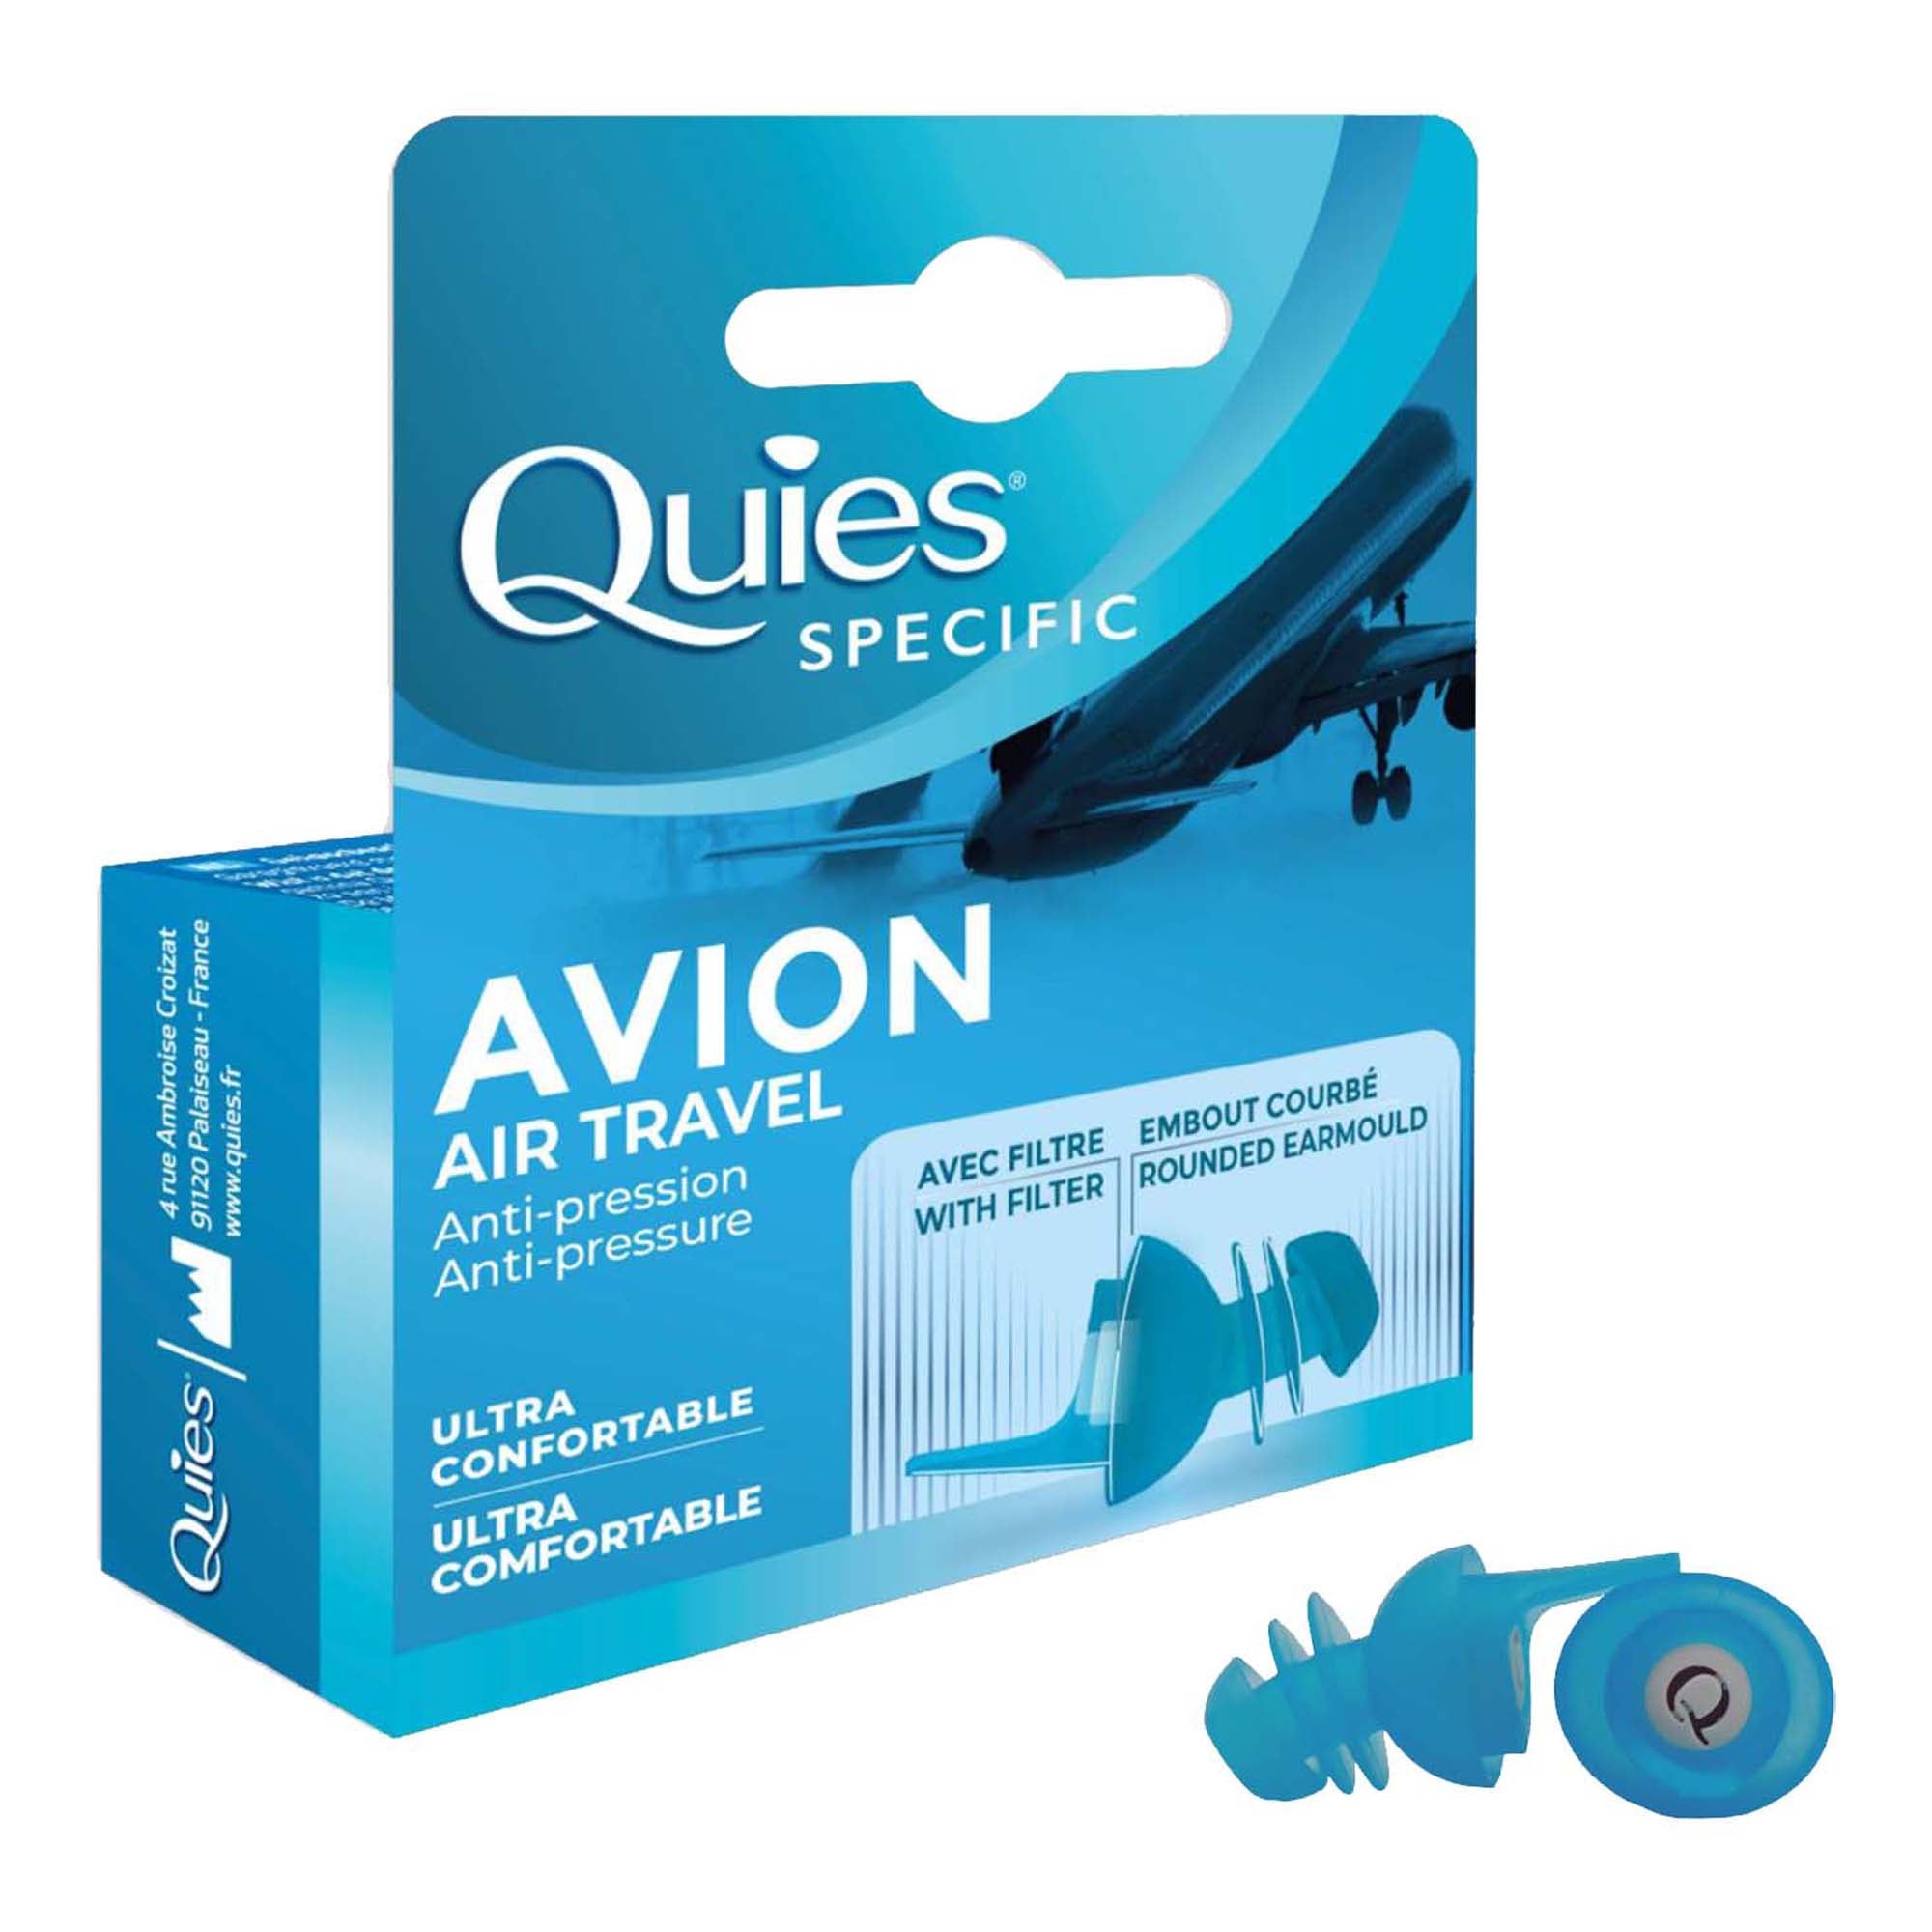  Caswell-Massey Boules Quies Ear Plugs – Natural